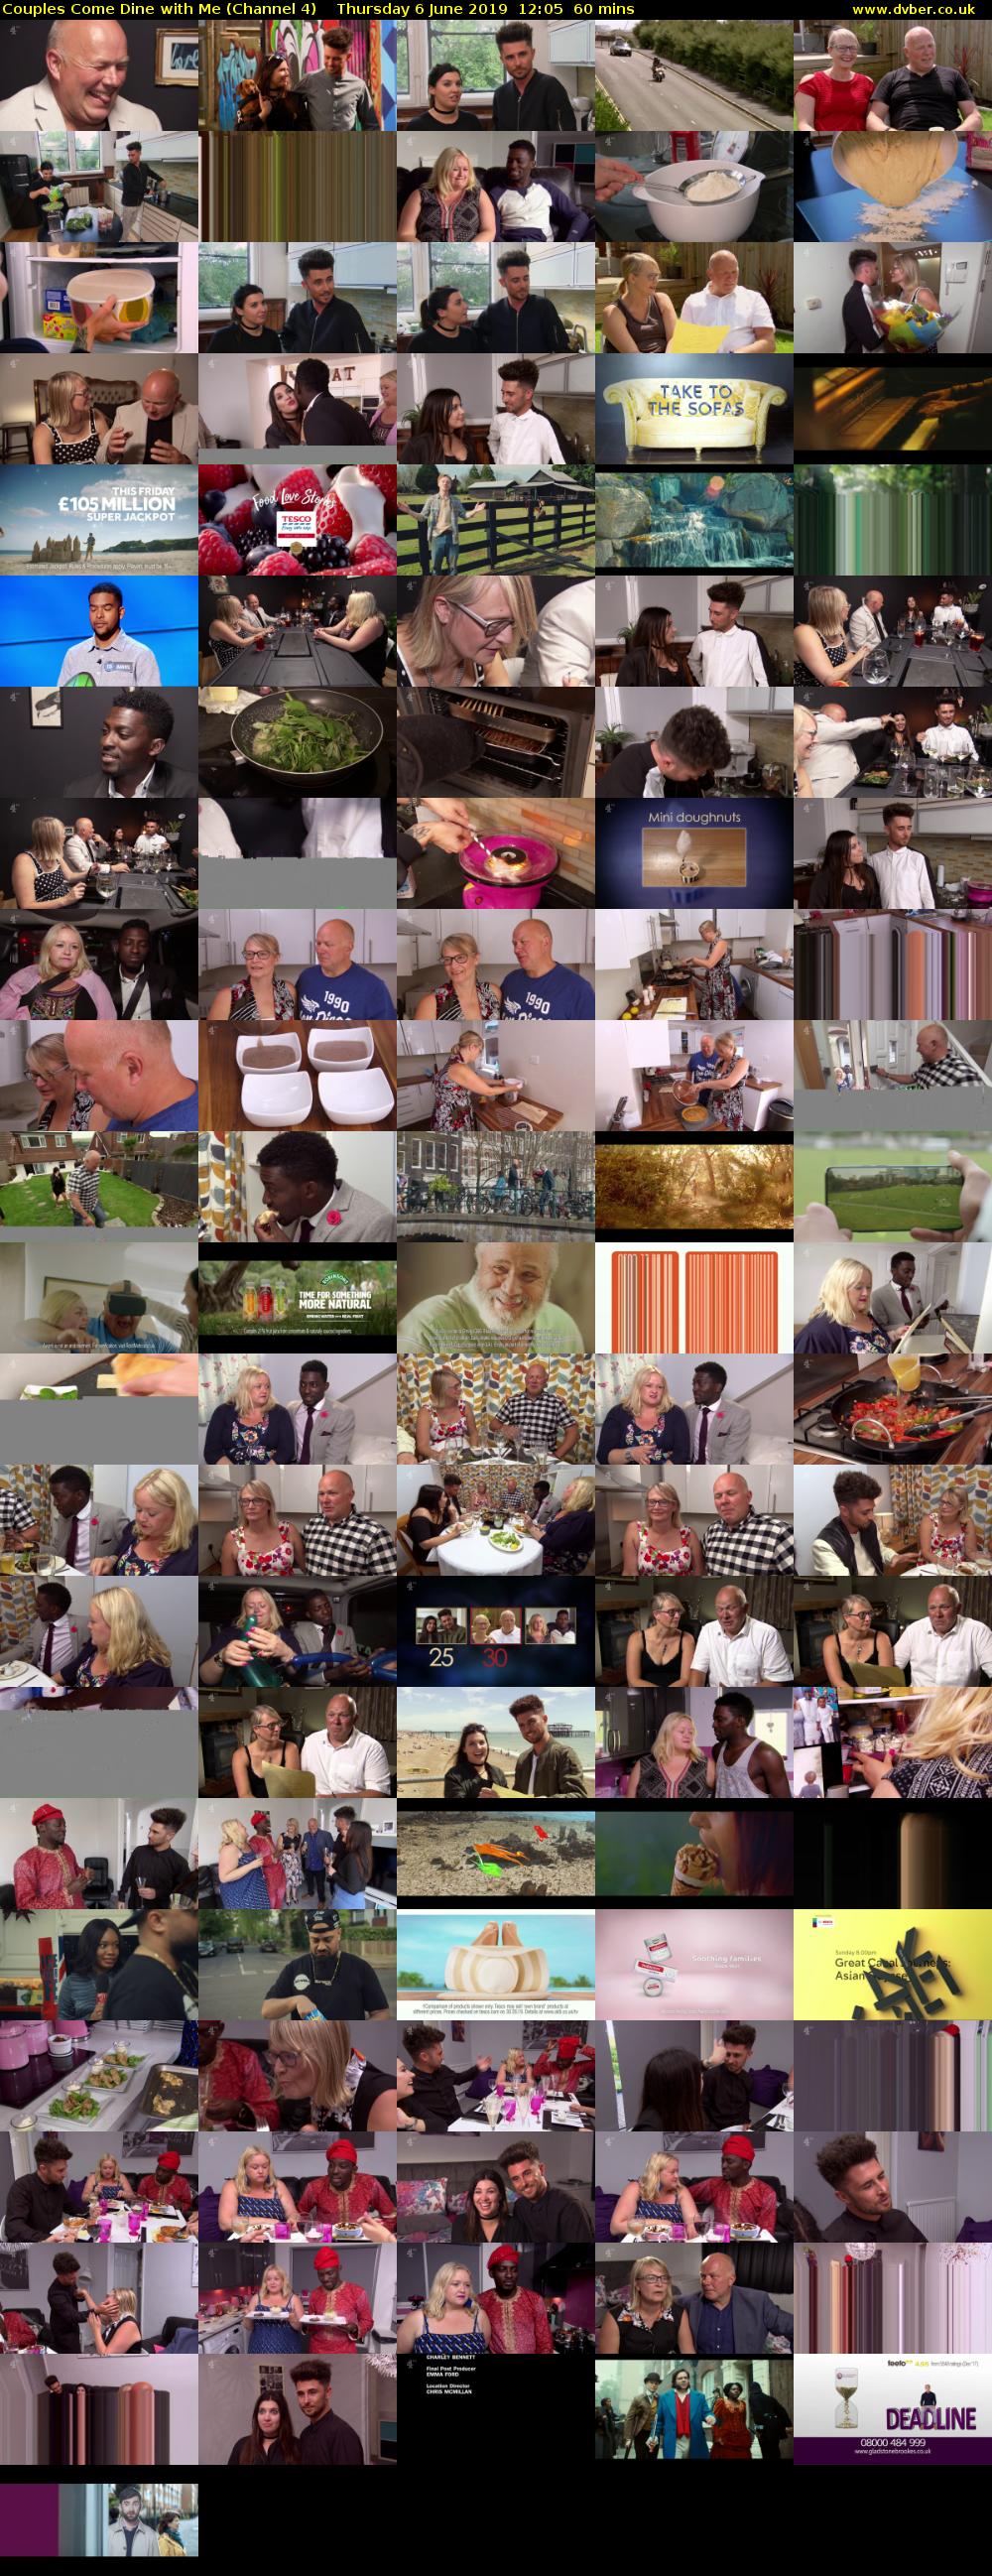 Couples Come Dine with Me (Channel 4) Thursday 6 June 2019 12:05 - 13:05